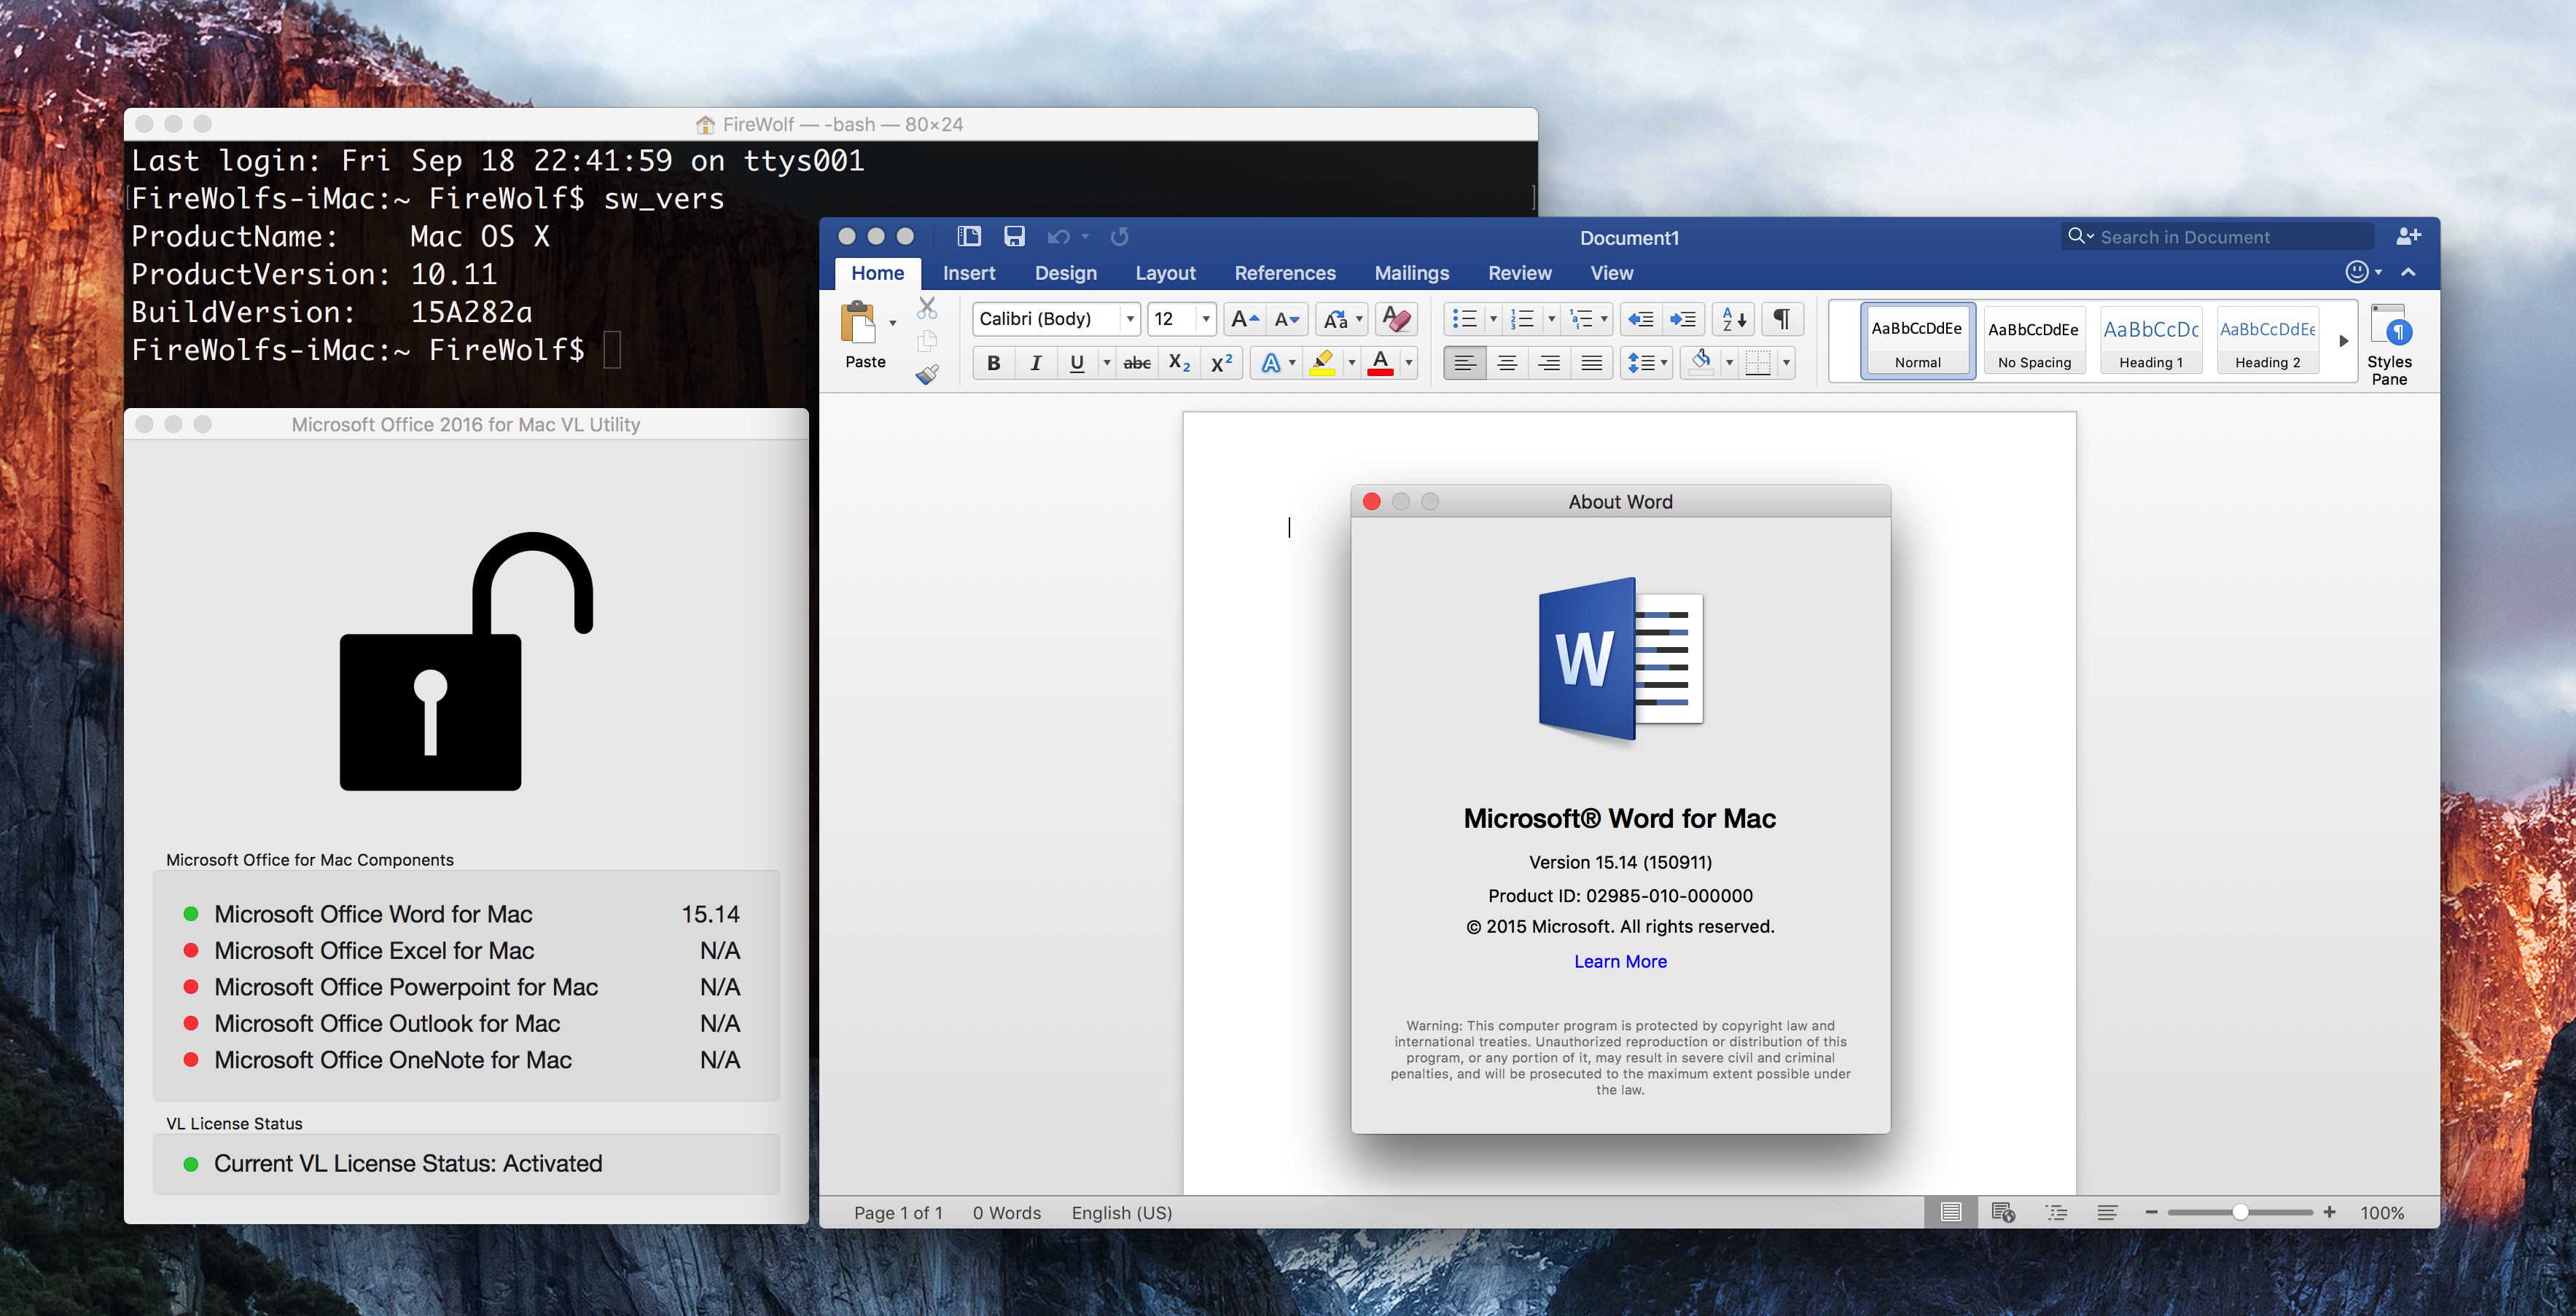 microsoft office 2016 for mac 15.25.0 with vl license utility v2.0